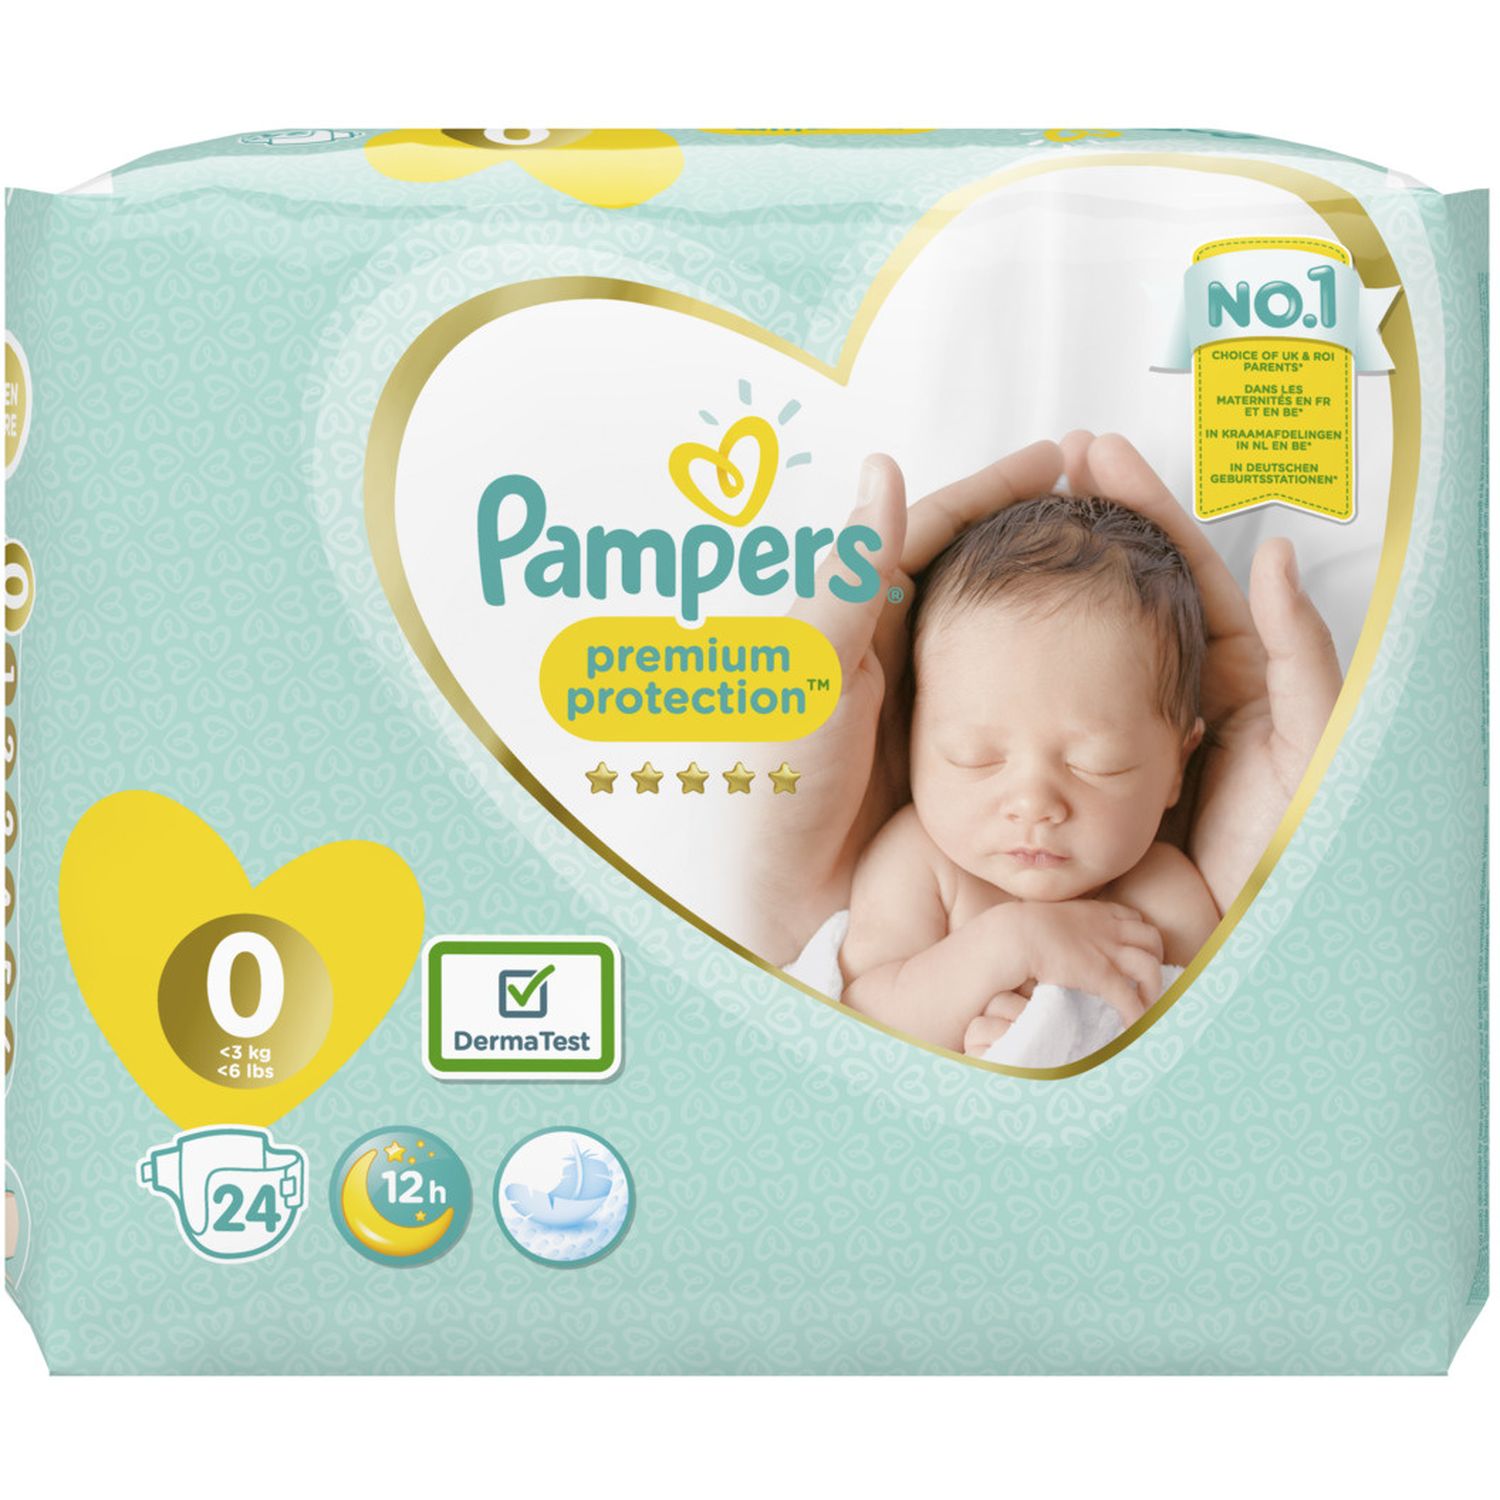 Lot de 2 cartons couches Pampers Harmonie taille 4 160 couches - Pampers